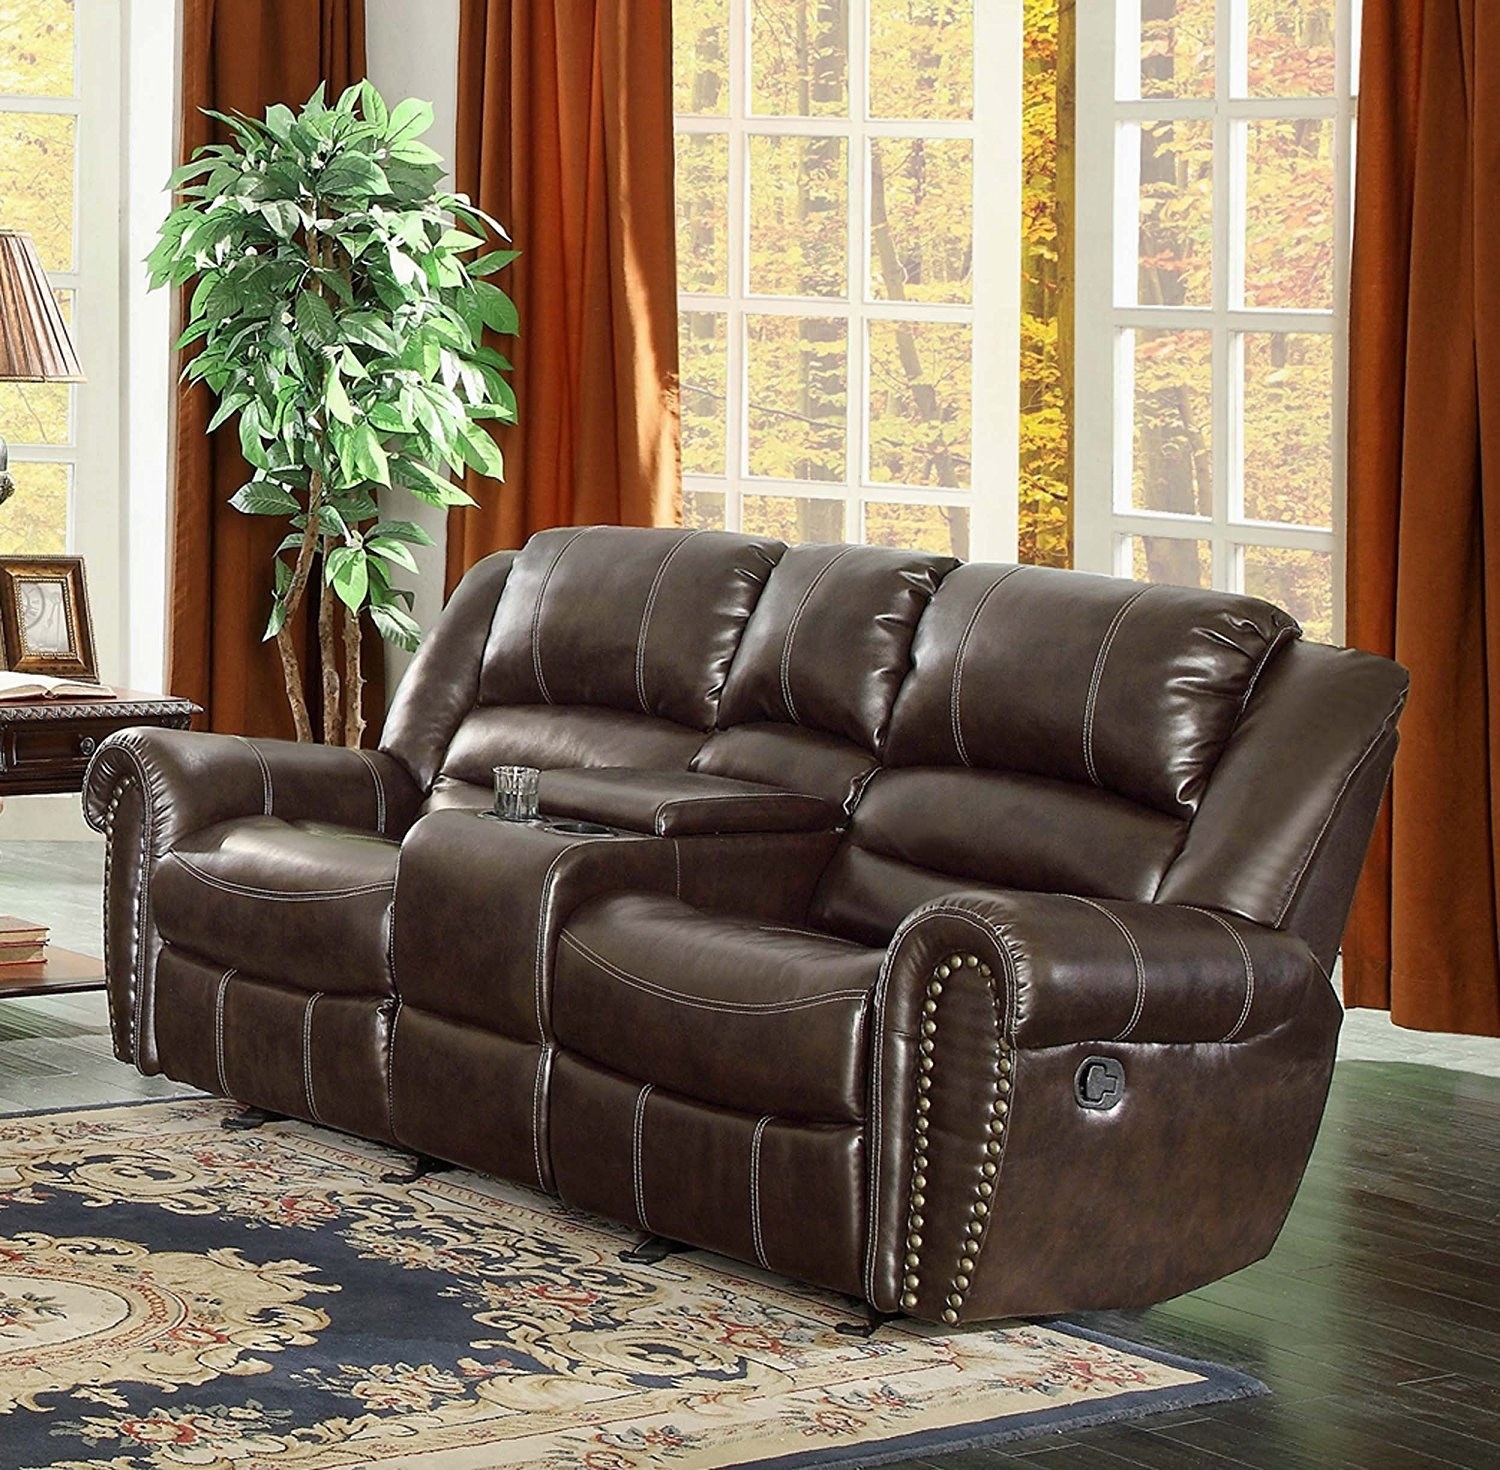 Homelegance 9668BRW-2 Double Glider Reclining Loveseat with Center Console, Brown Bonded Leather